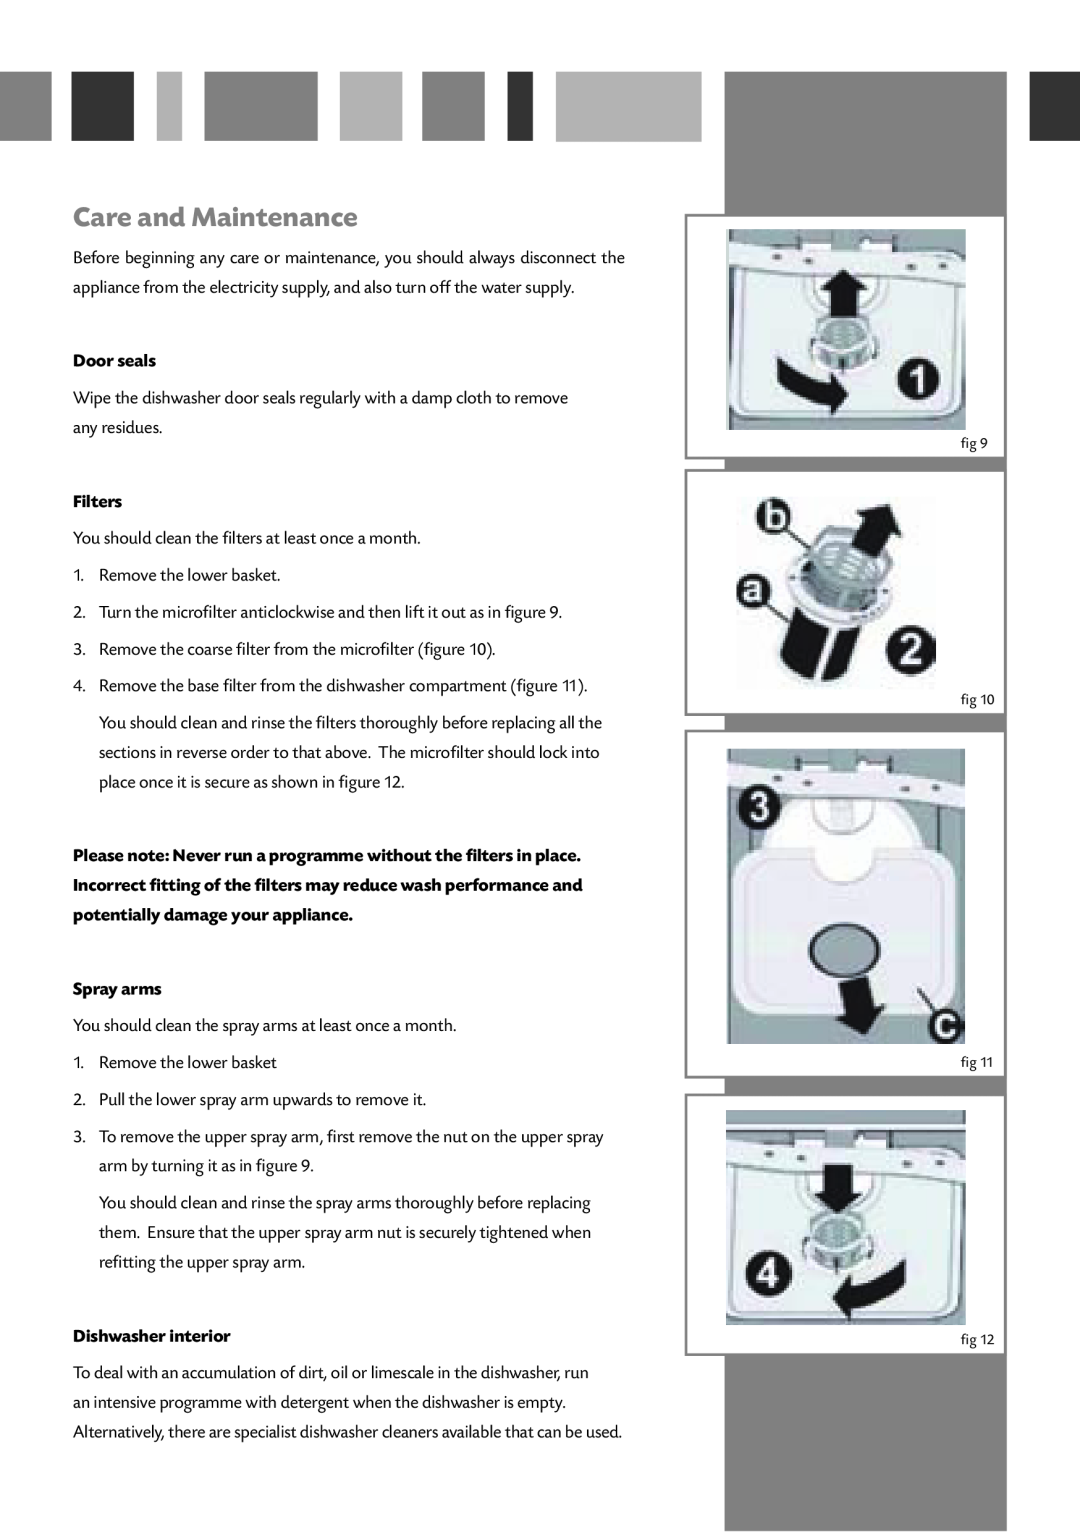 Bosch Appliances WC140 manual Care and Maintenance, Door seals, Filters, Spray arms, Dishwasher interior 